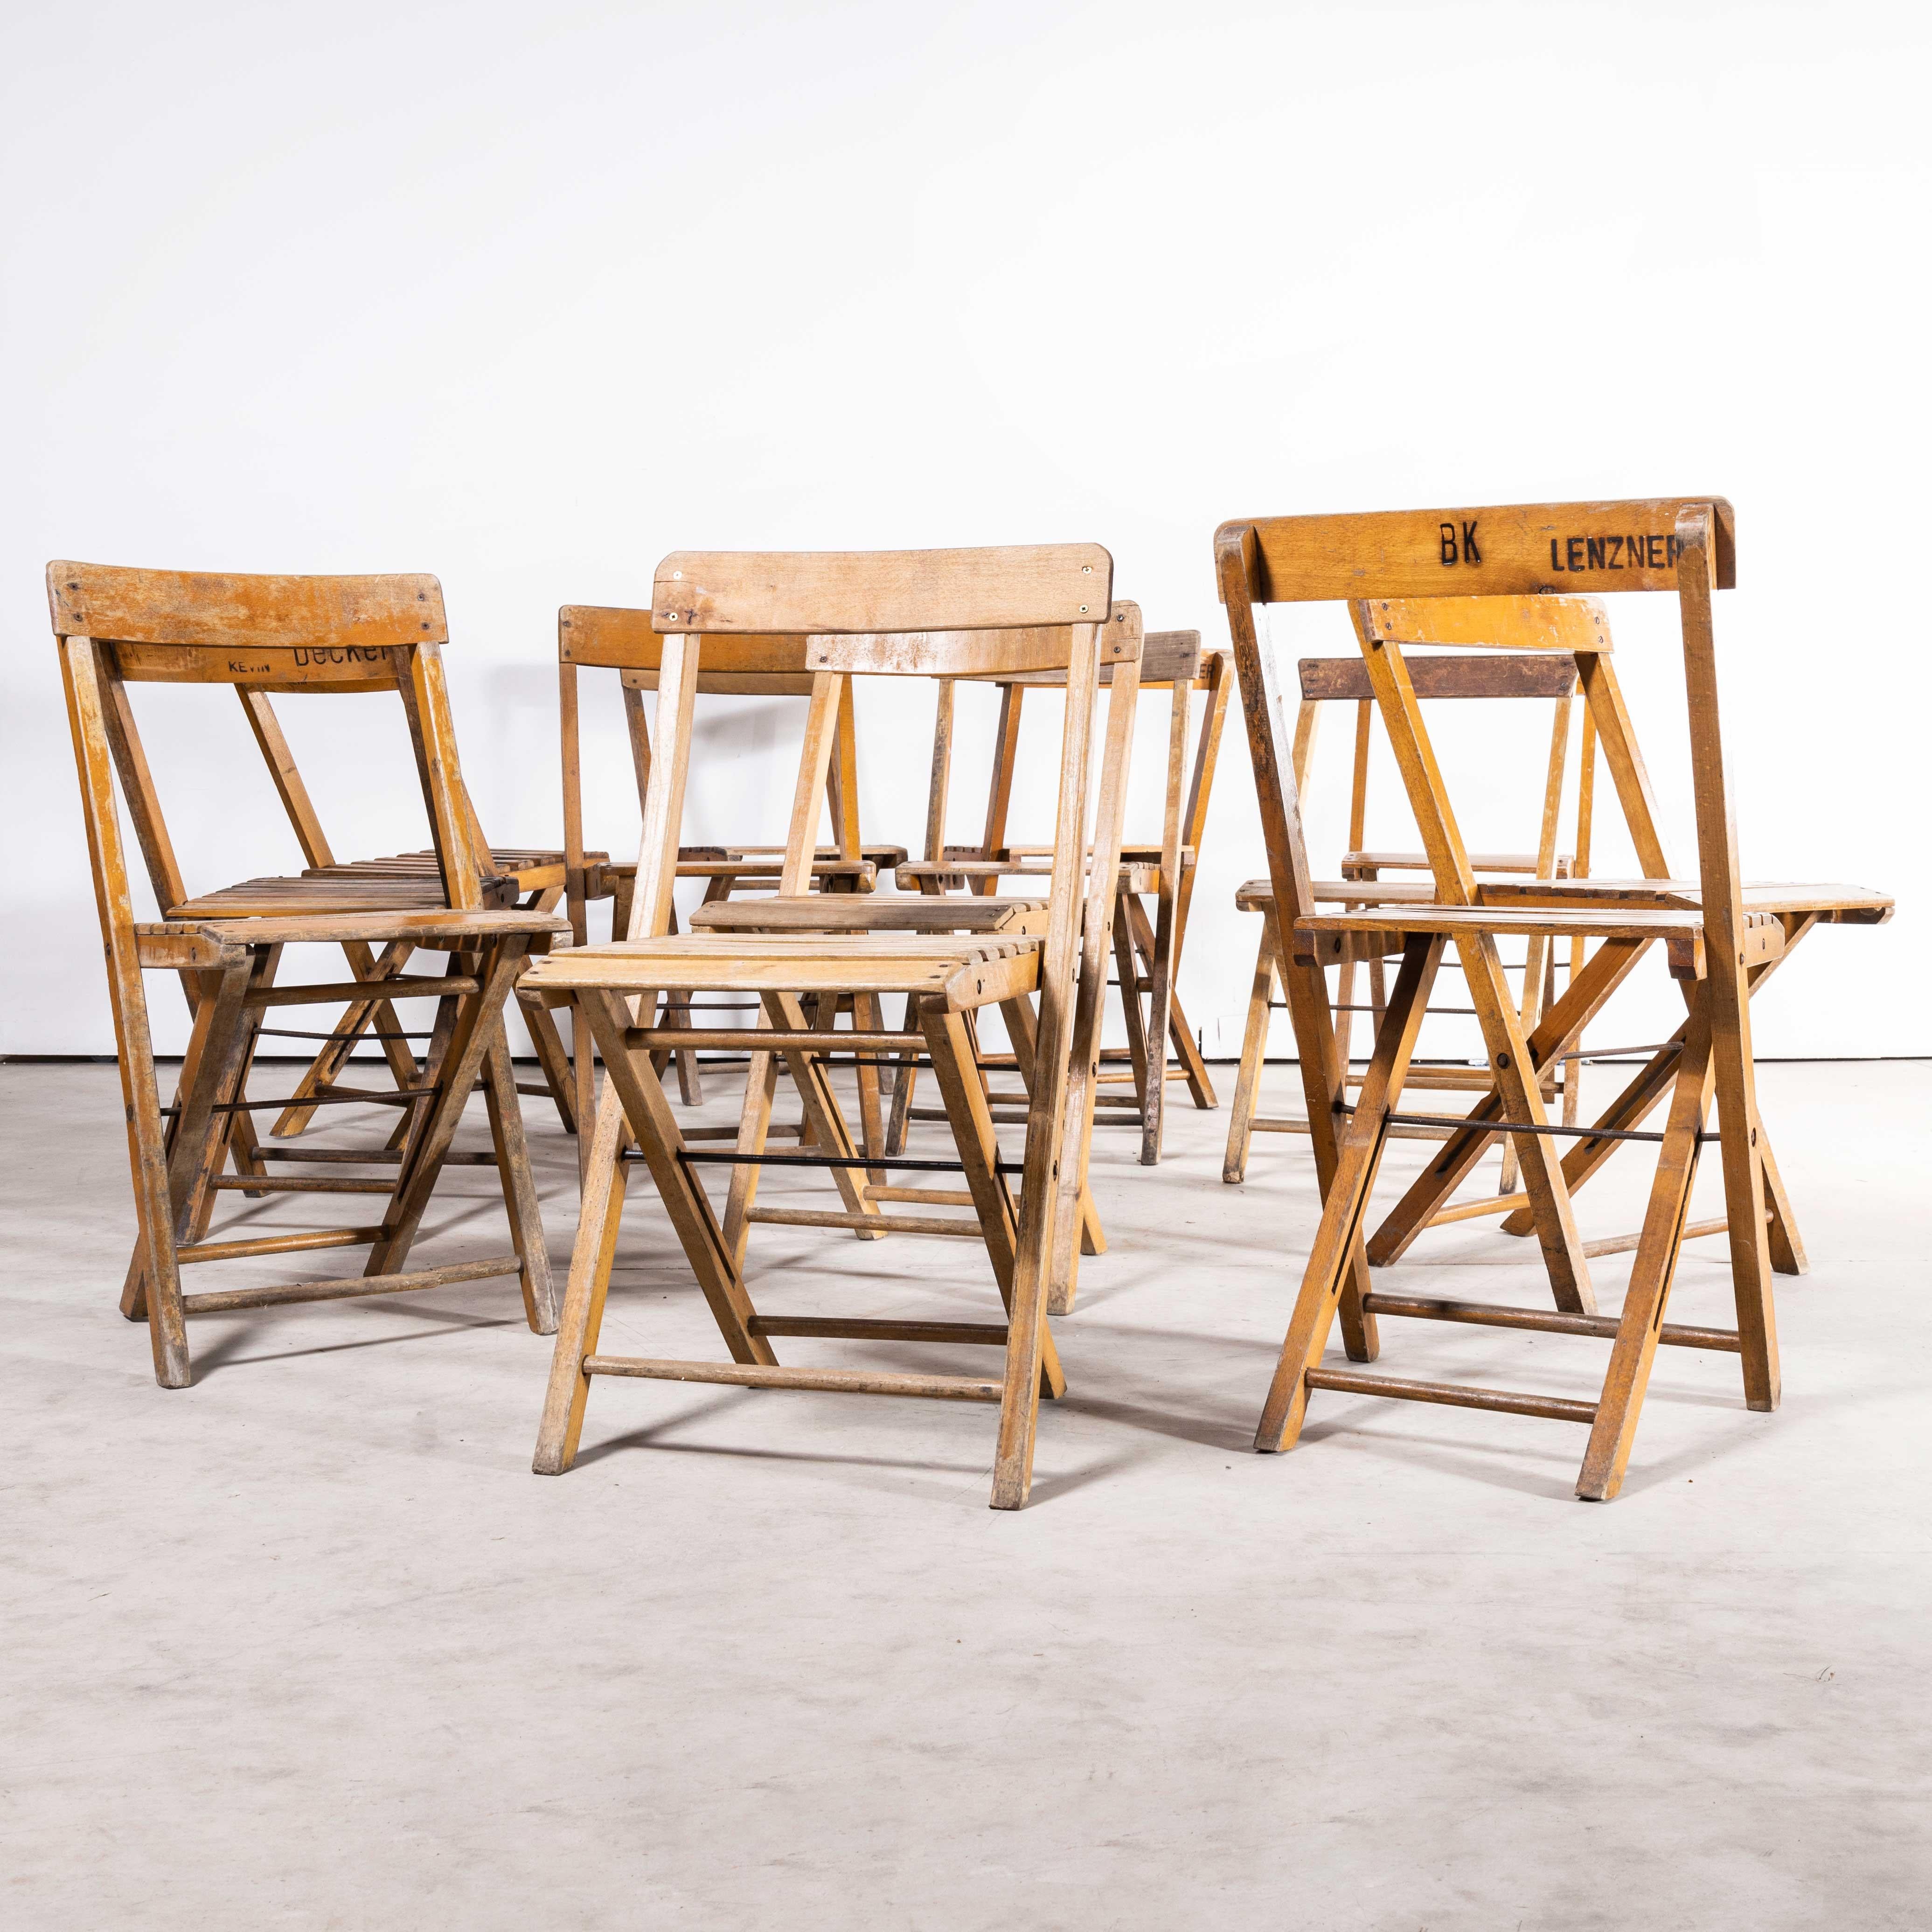 1960s Beech folding chairs – set of thirteen
1960s Beech folding chairs – set of thirteen. Good practical Classic folding chairs originally made in Germany of solid beech. Every chair passes through our workshops where they are cleaned and